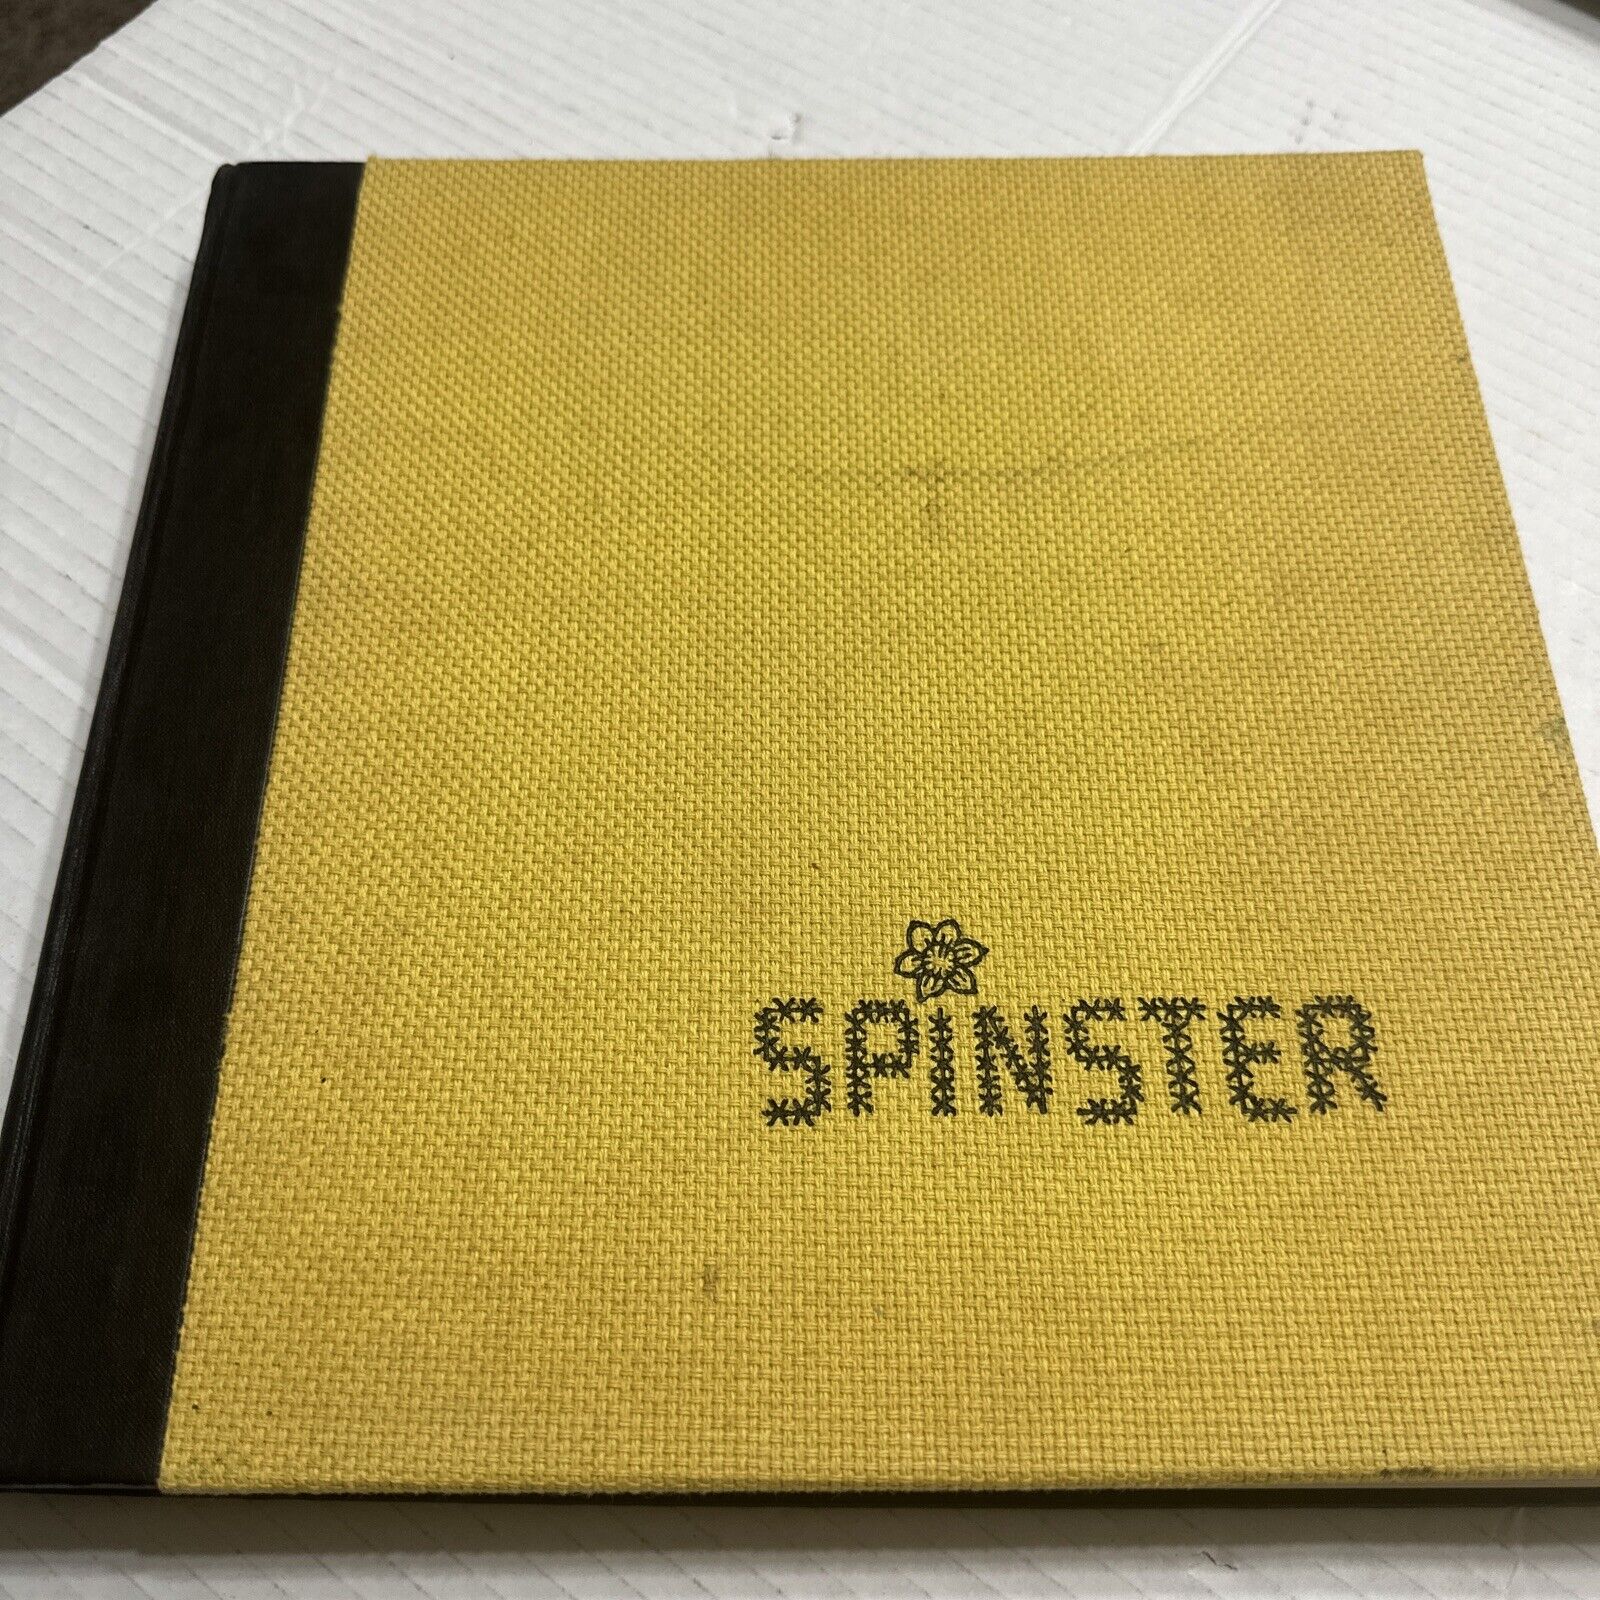 Hollins College 1967 Annual Yearbook The Spinster Rare